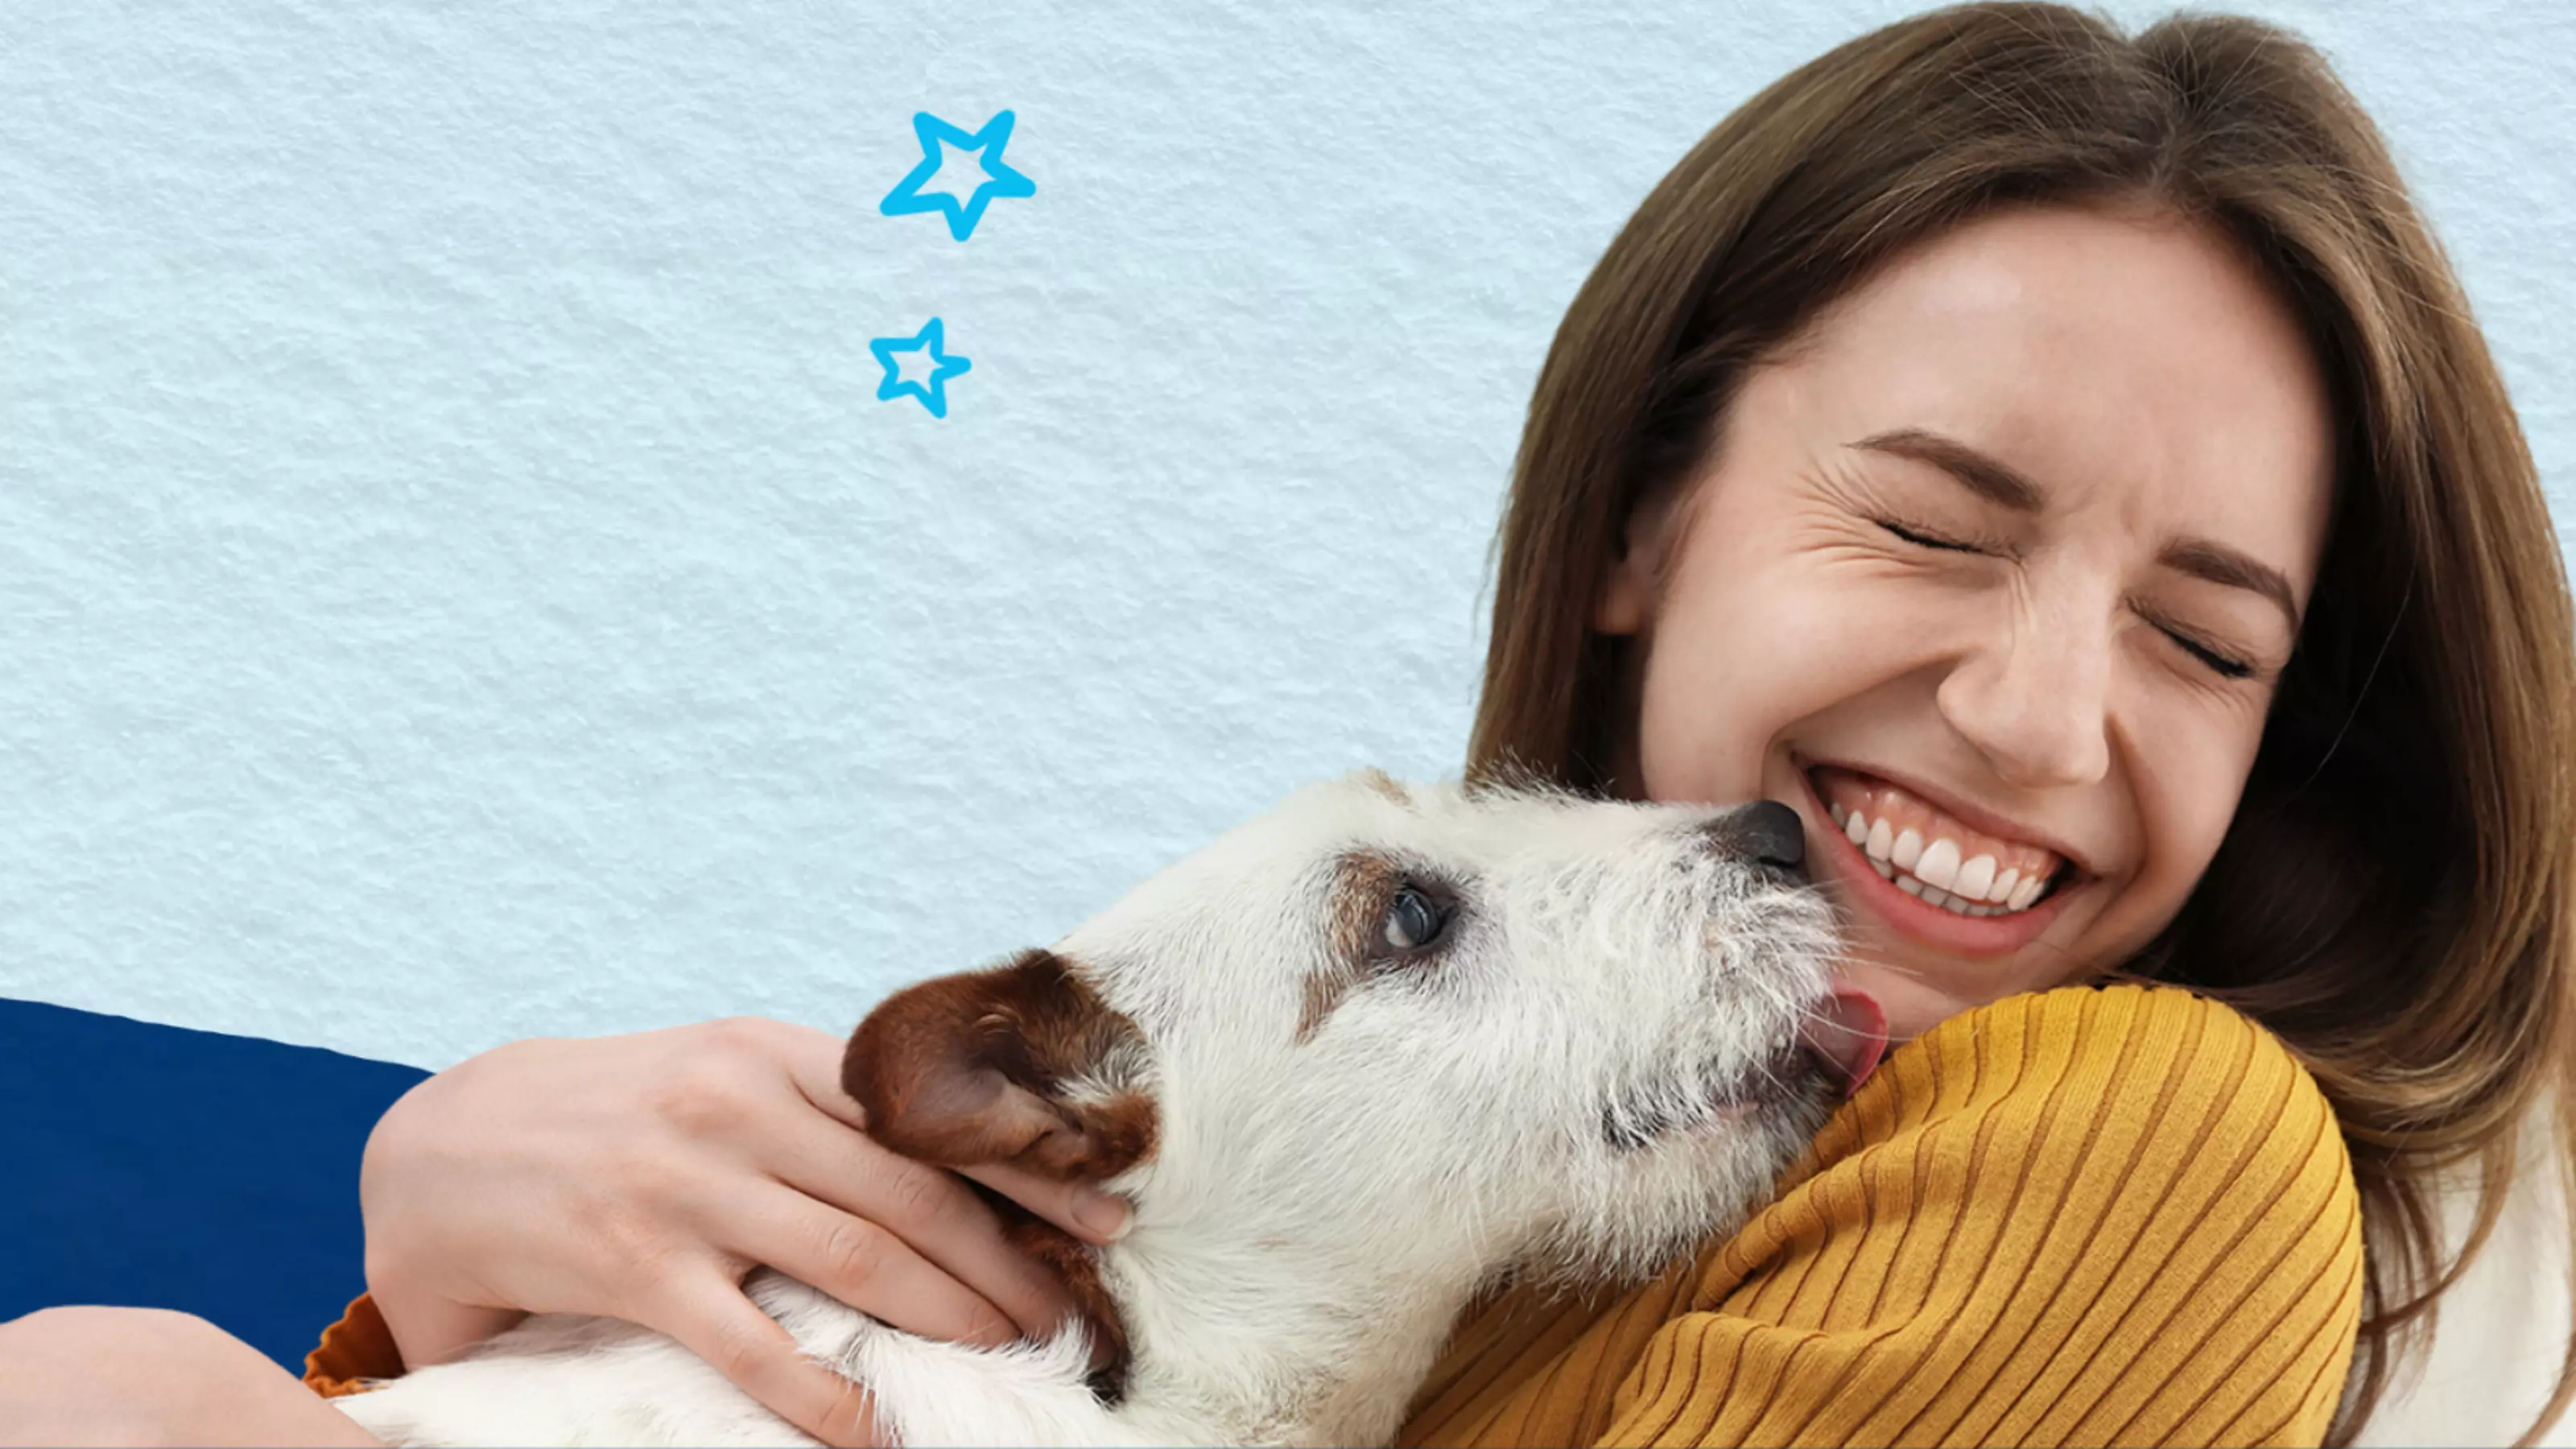 A lady smiles as a jack russell licks her face. Behind them is a blue background and illustrated stars.